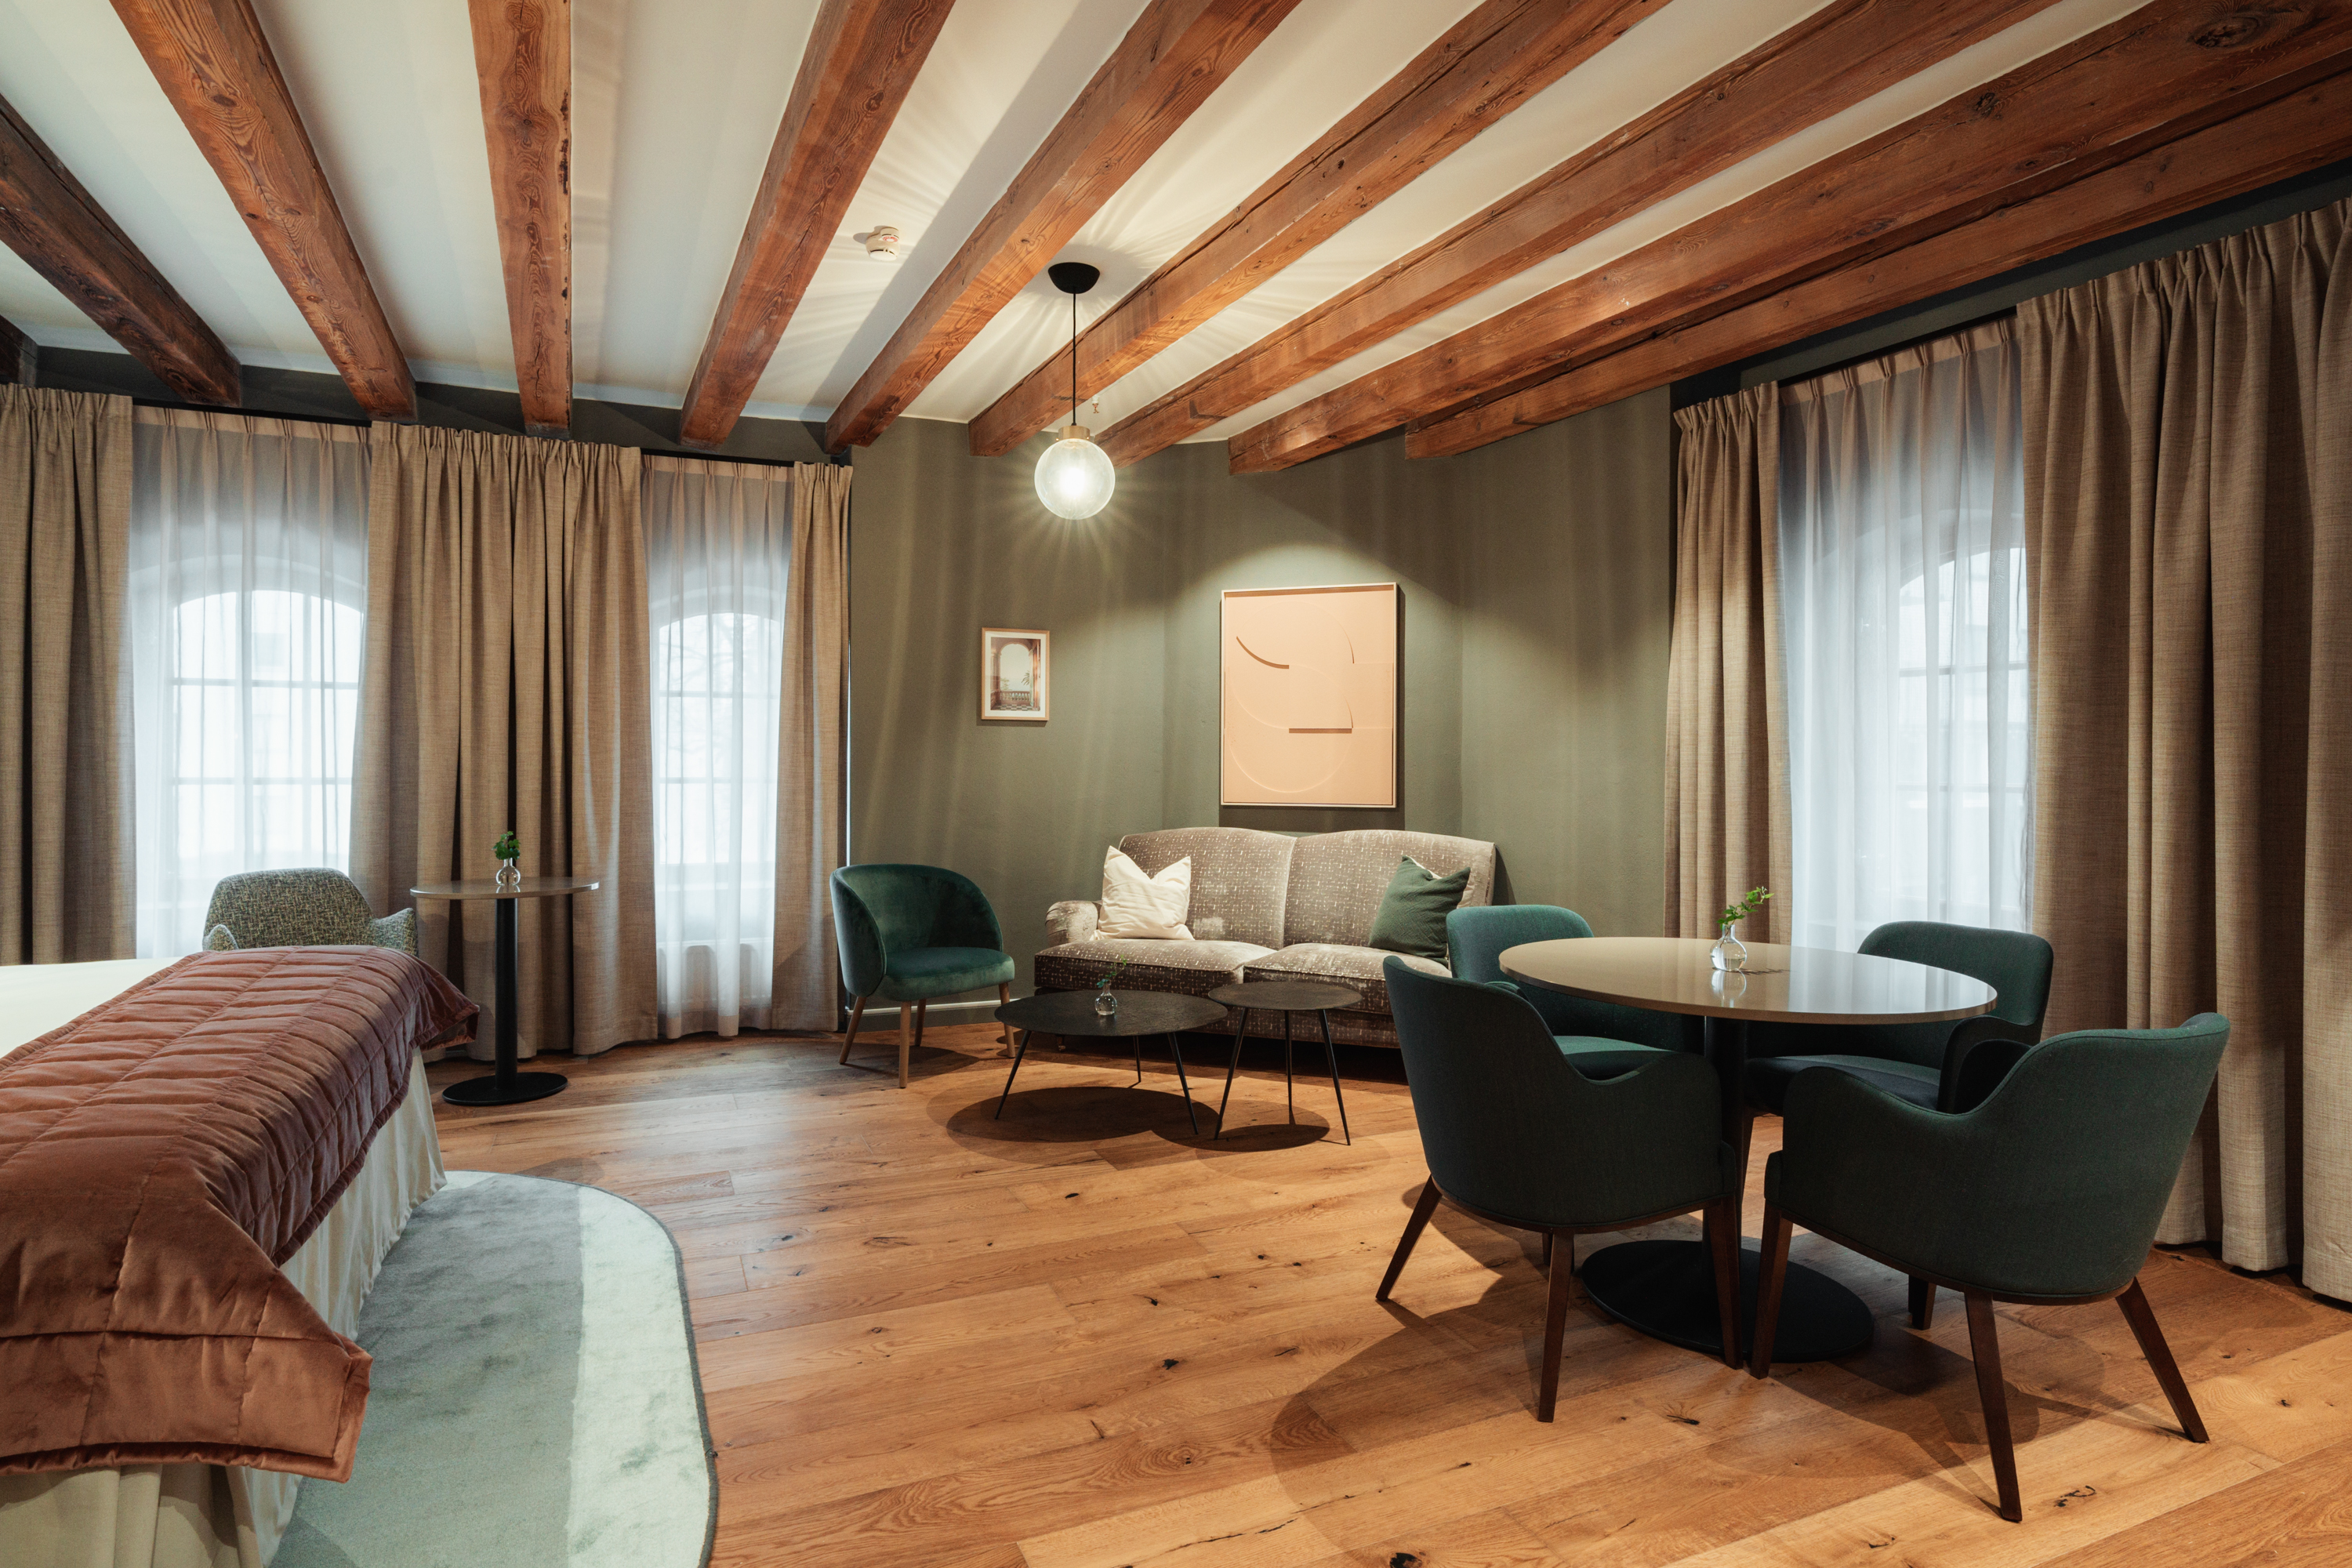 Cozy suite with dining area, sofa area and wooden beams in the ceiling